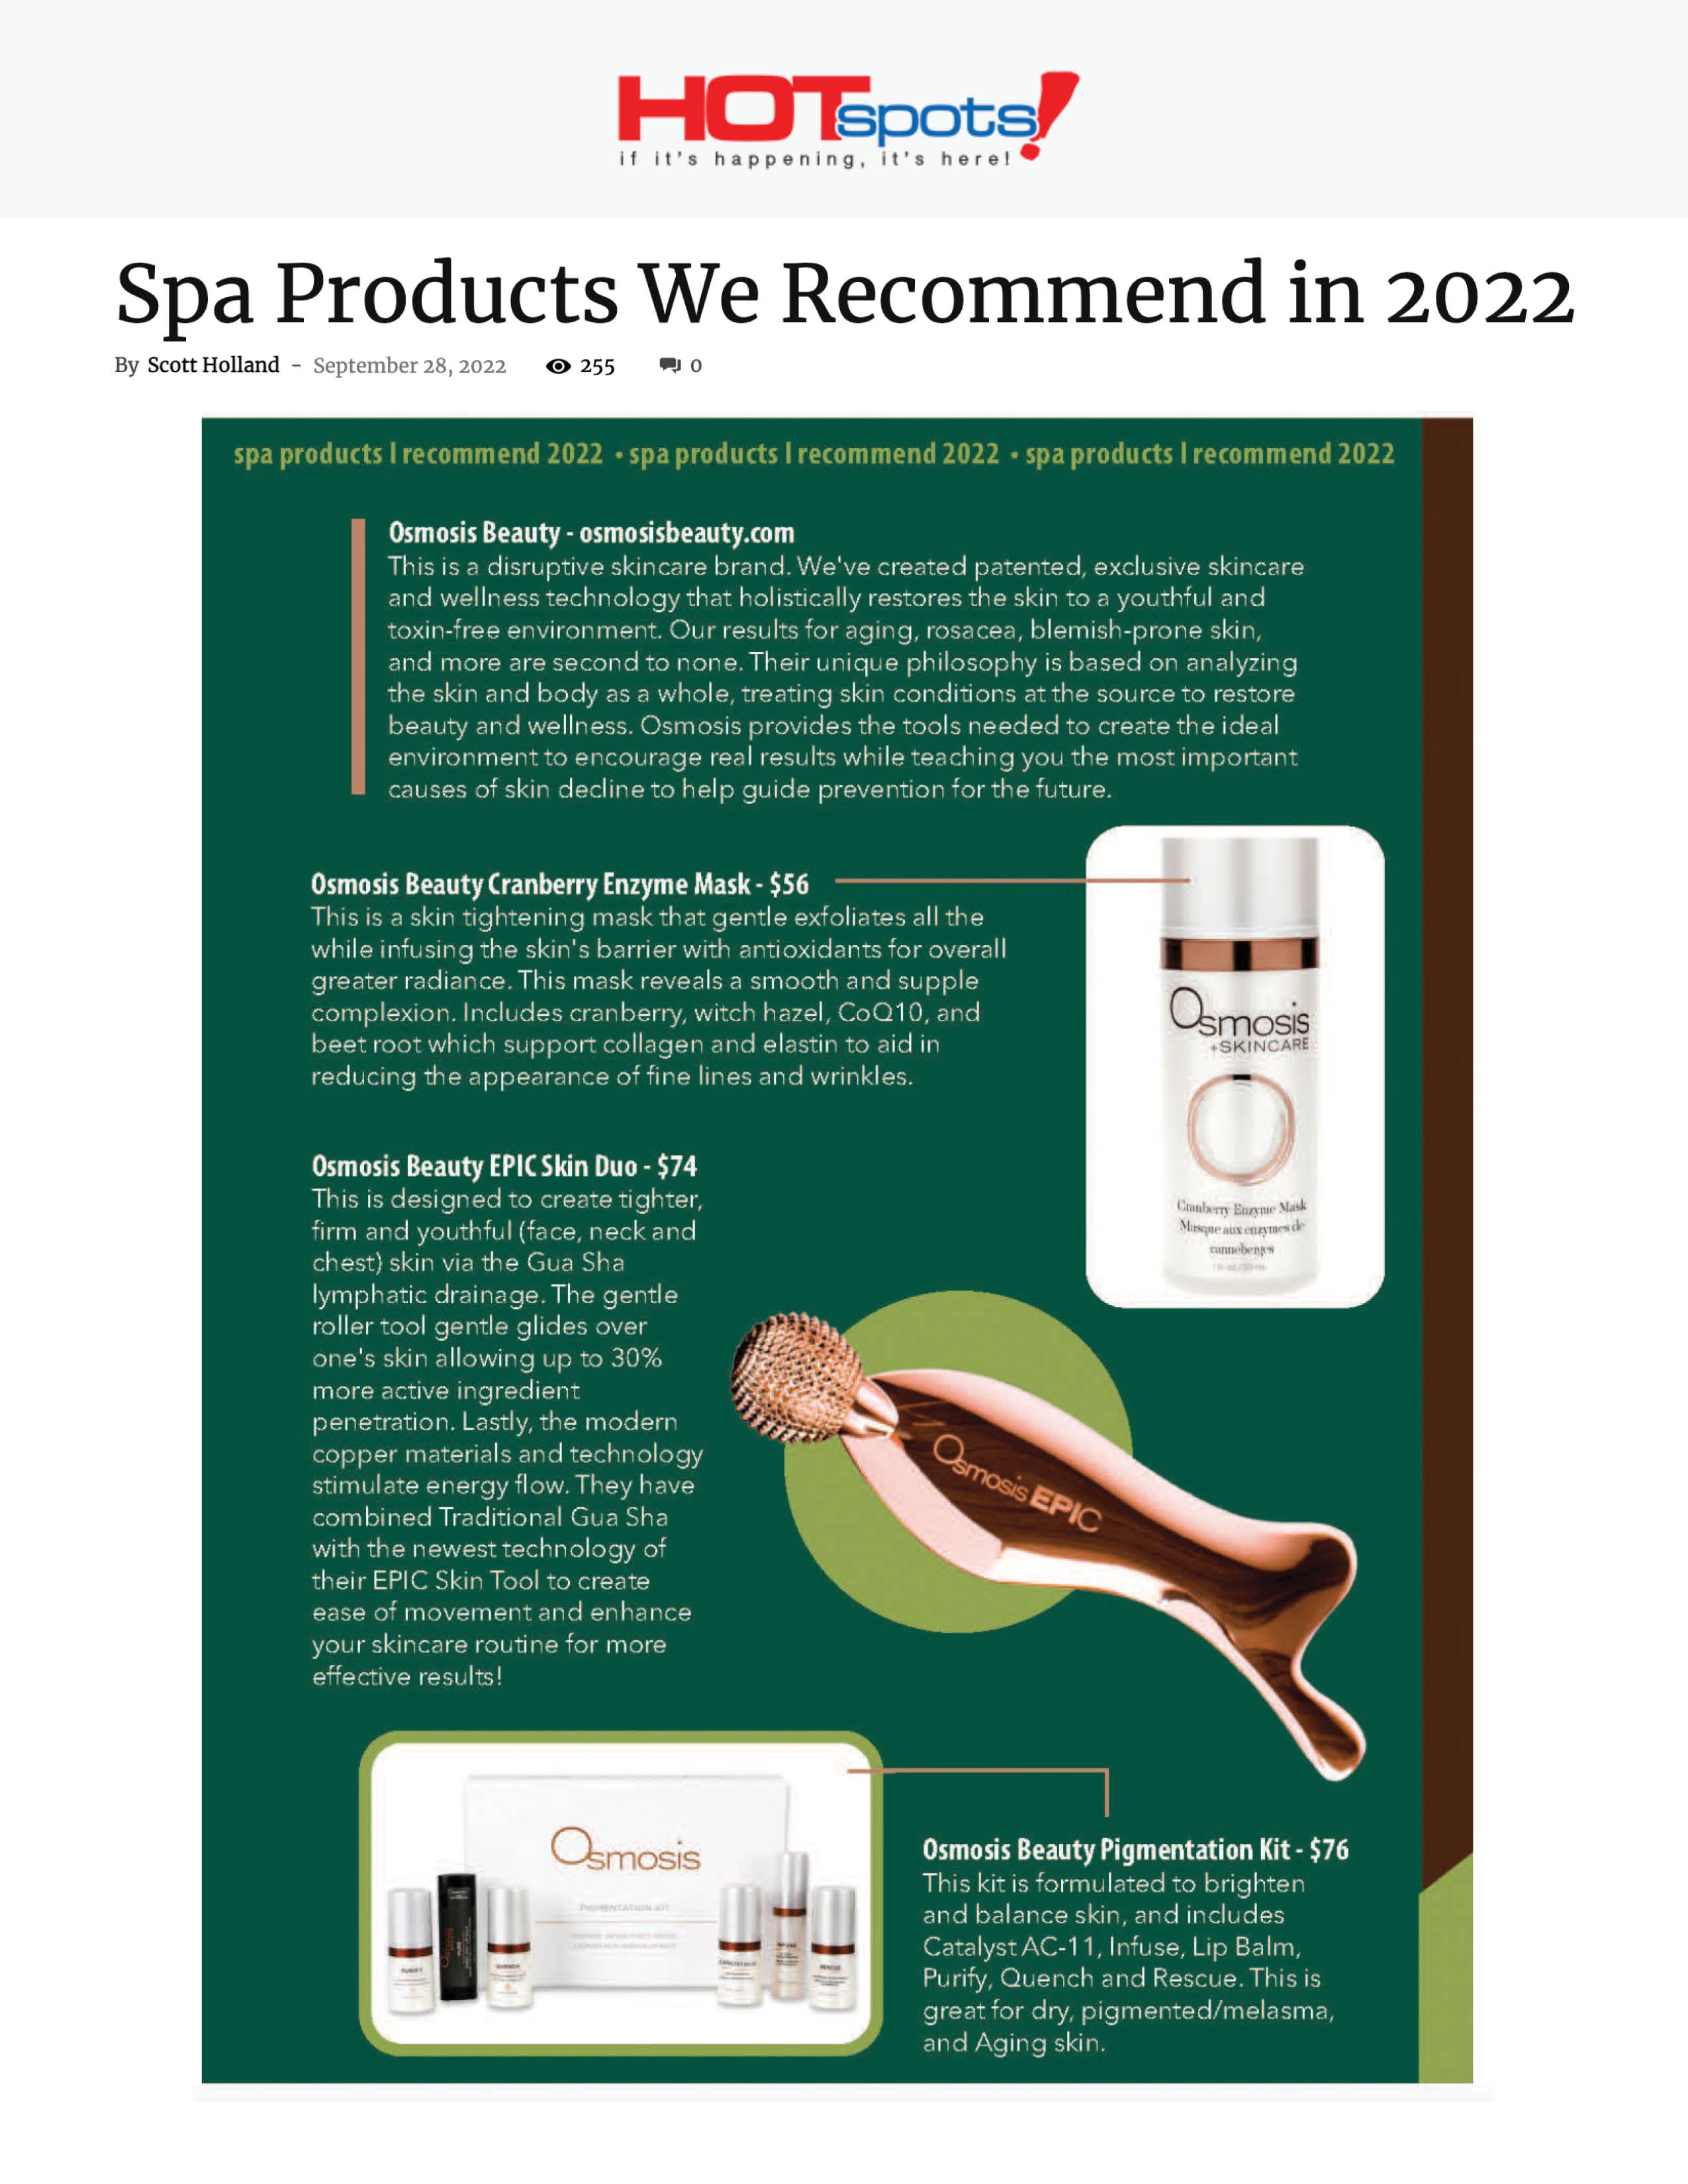 Cranberry Enzyme Mask EPIC Skin Duo and Pigmentation Kit were included in a Spa Products feature for HotSpots Magazine